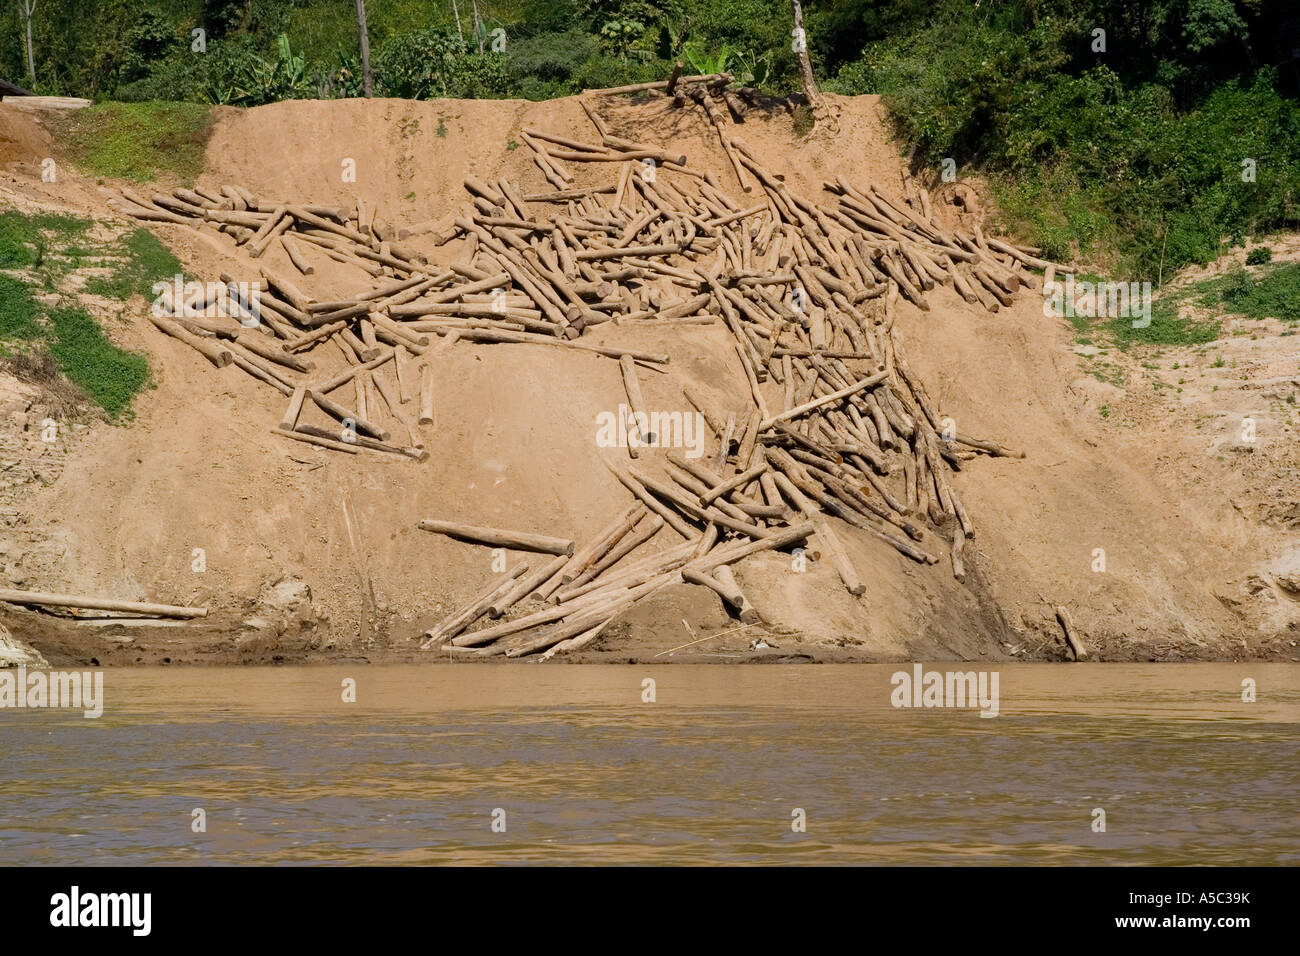 Logs to be Floated Downstream Pak Beng Laos Stock Photo